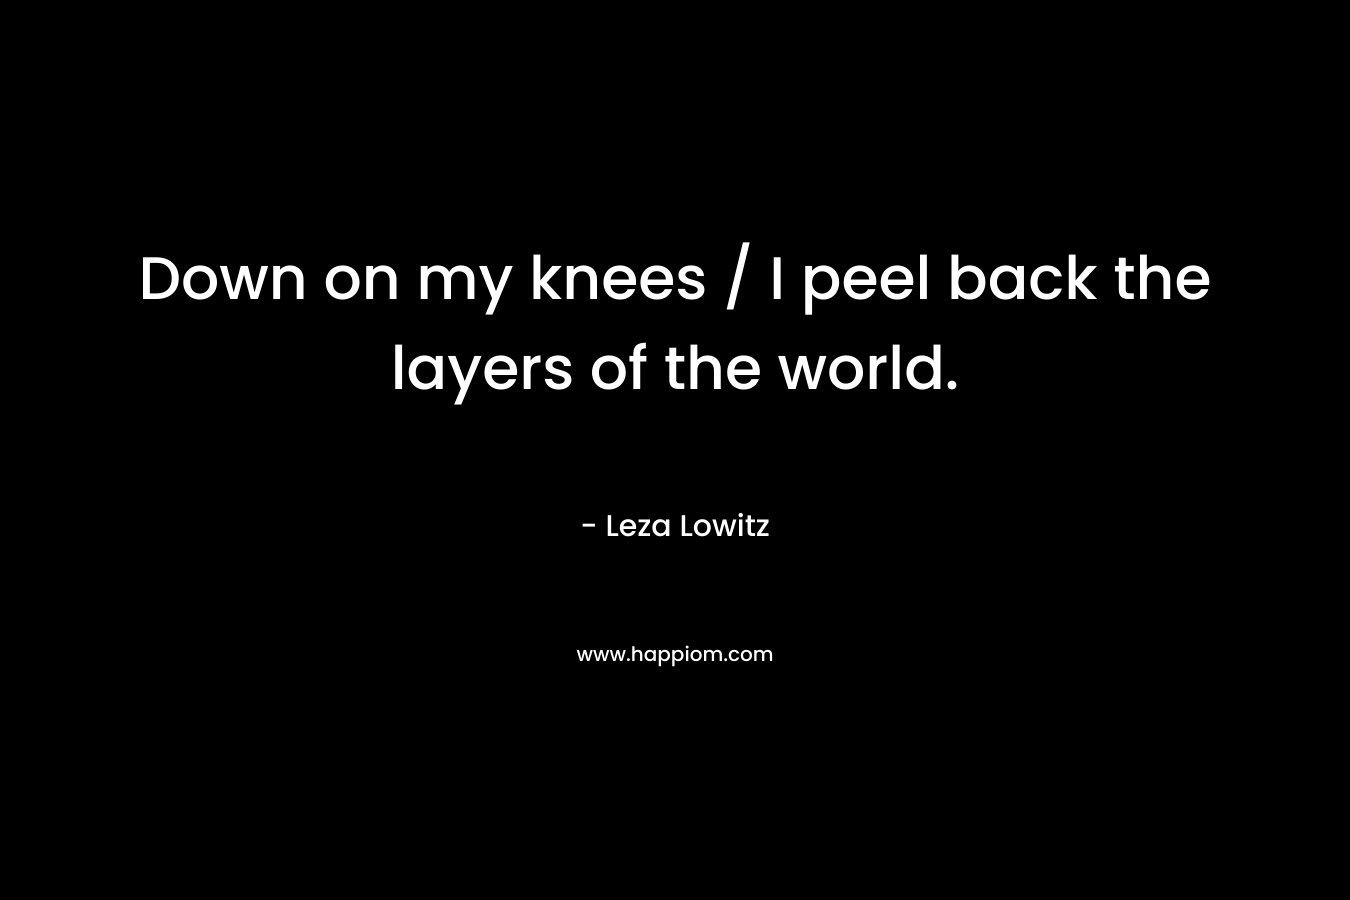 Down on my knees / I peel back the layers of the world. – Leza Lowitz